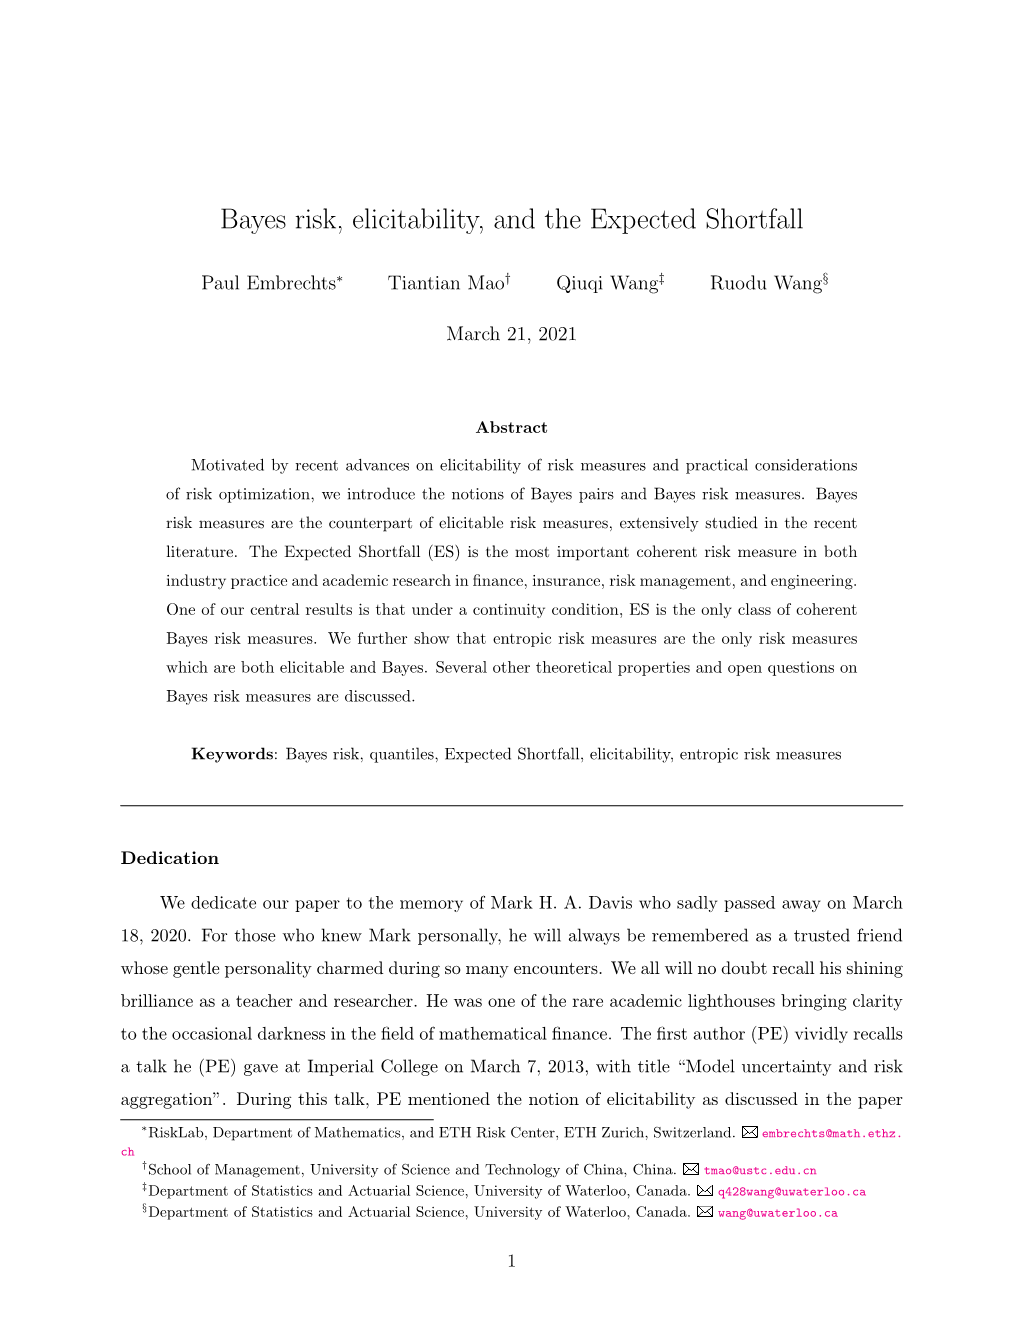 Bayes Risk, Elicitability, and the Expected Shortfall